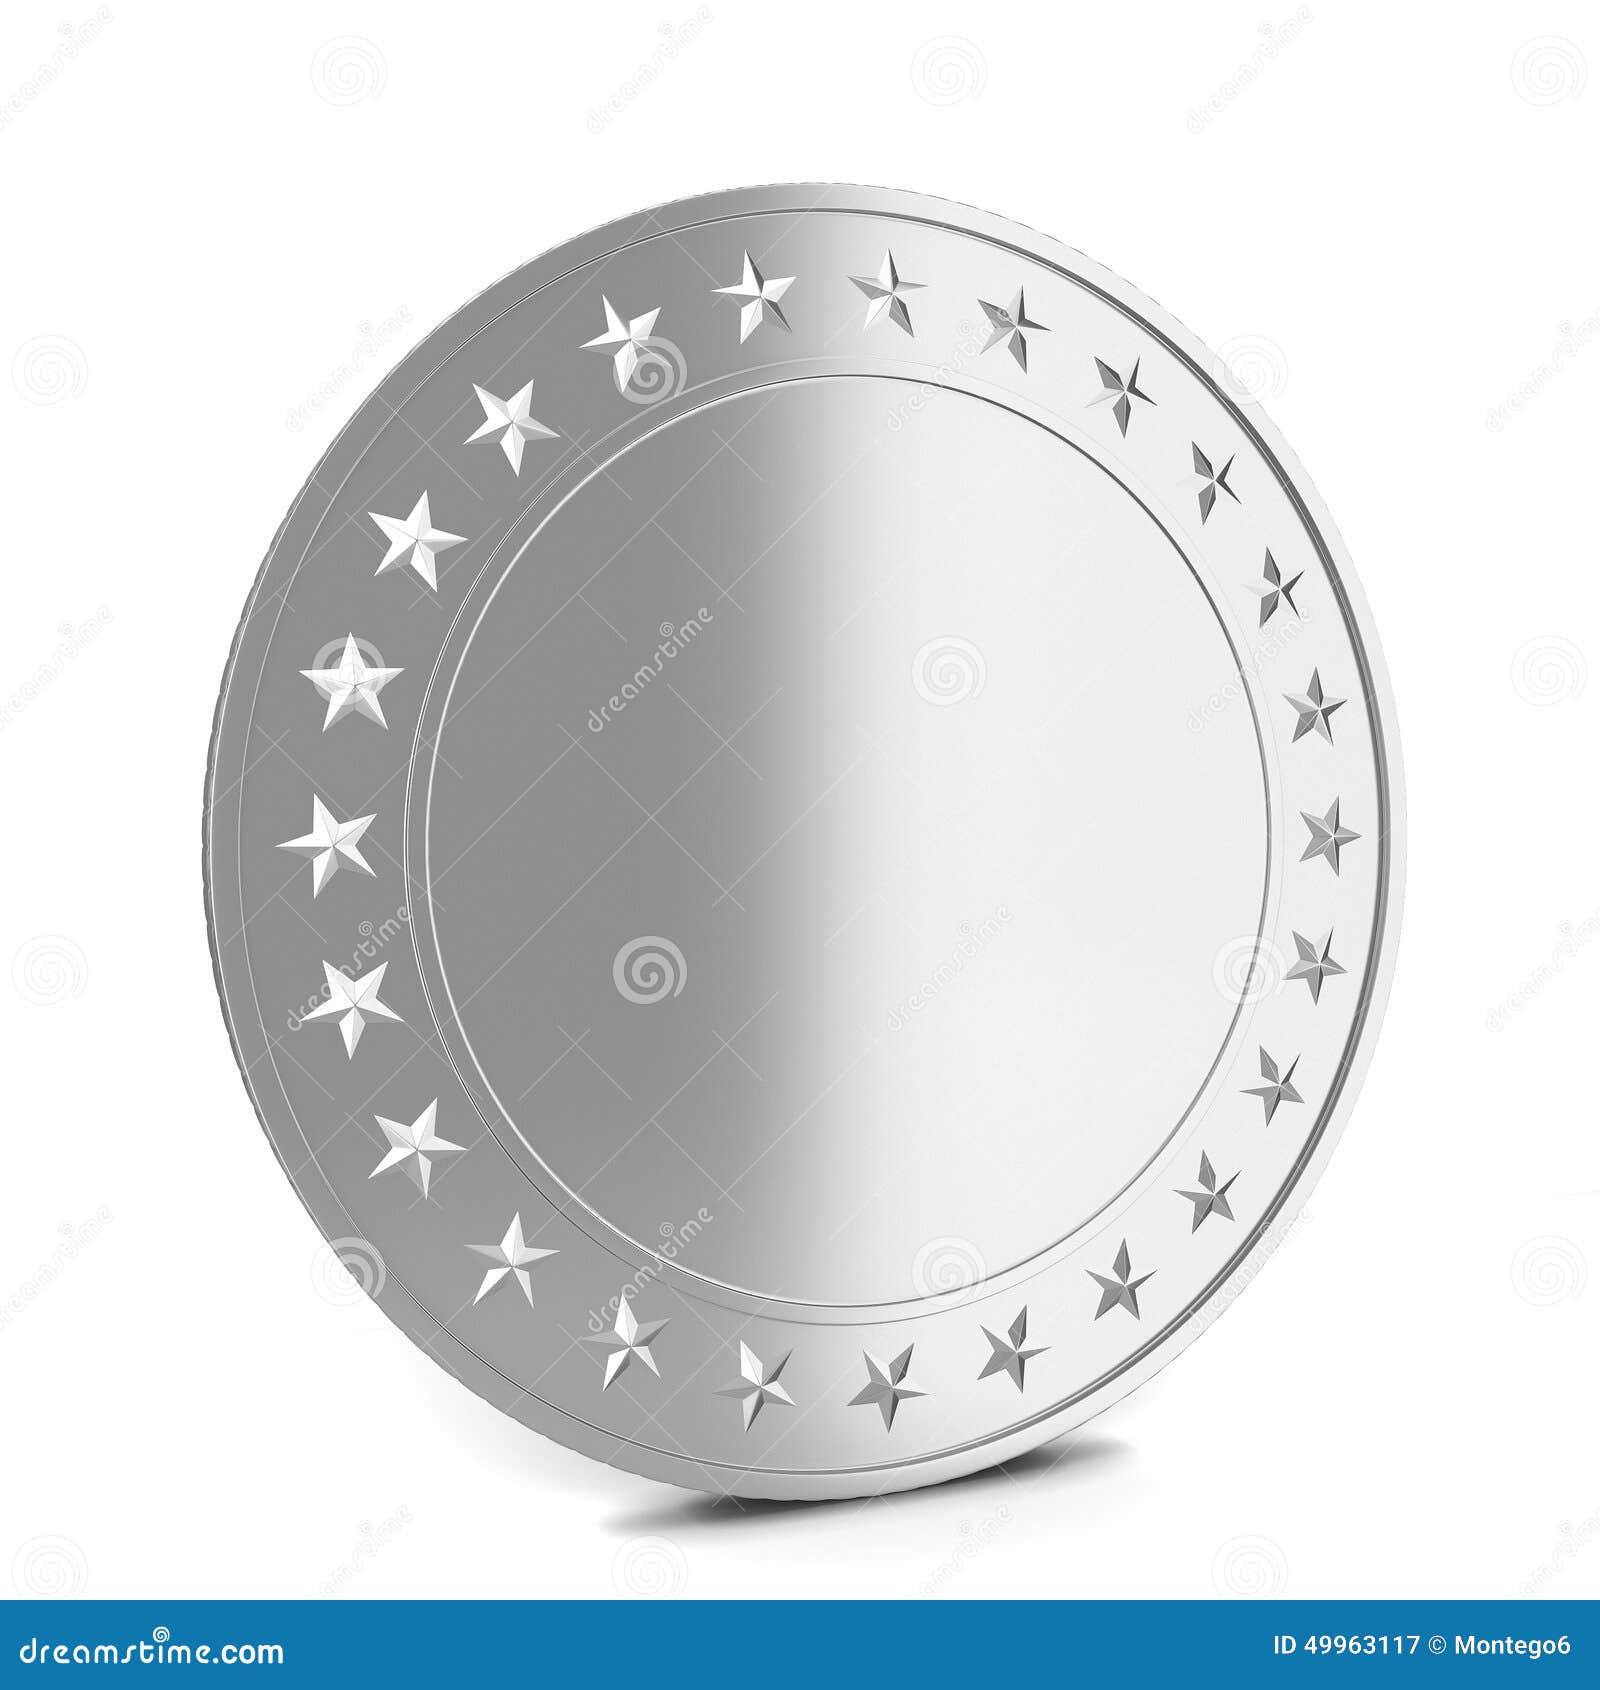 Silver coin stock illustration. Illustration of background - 49963117